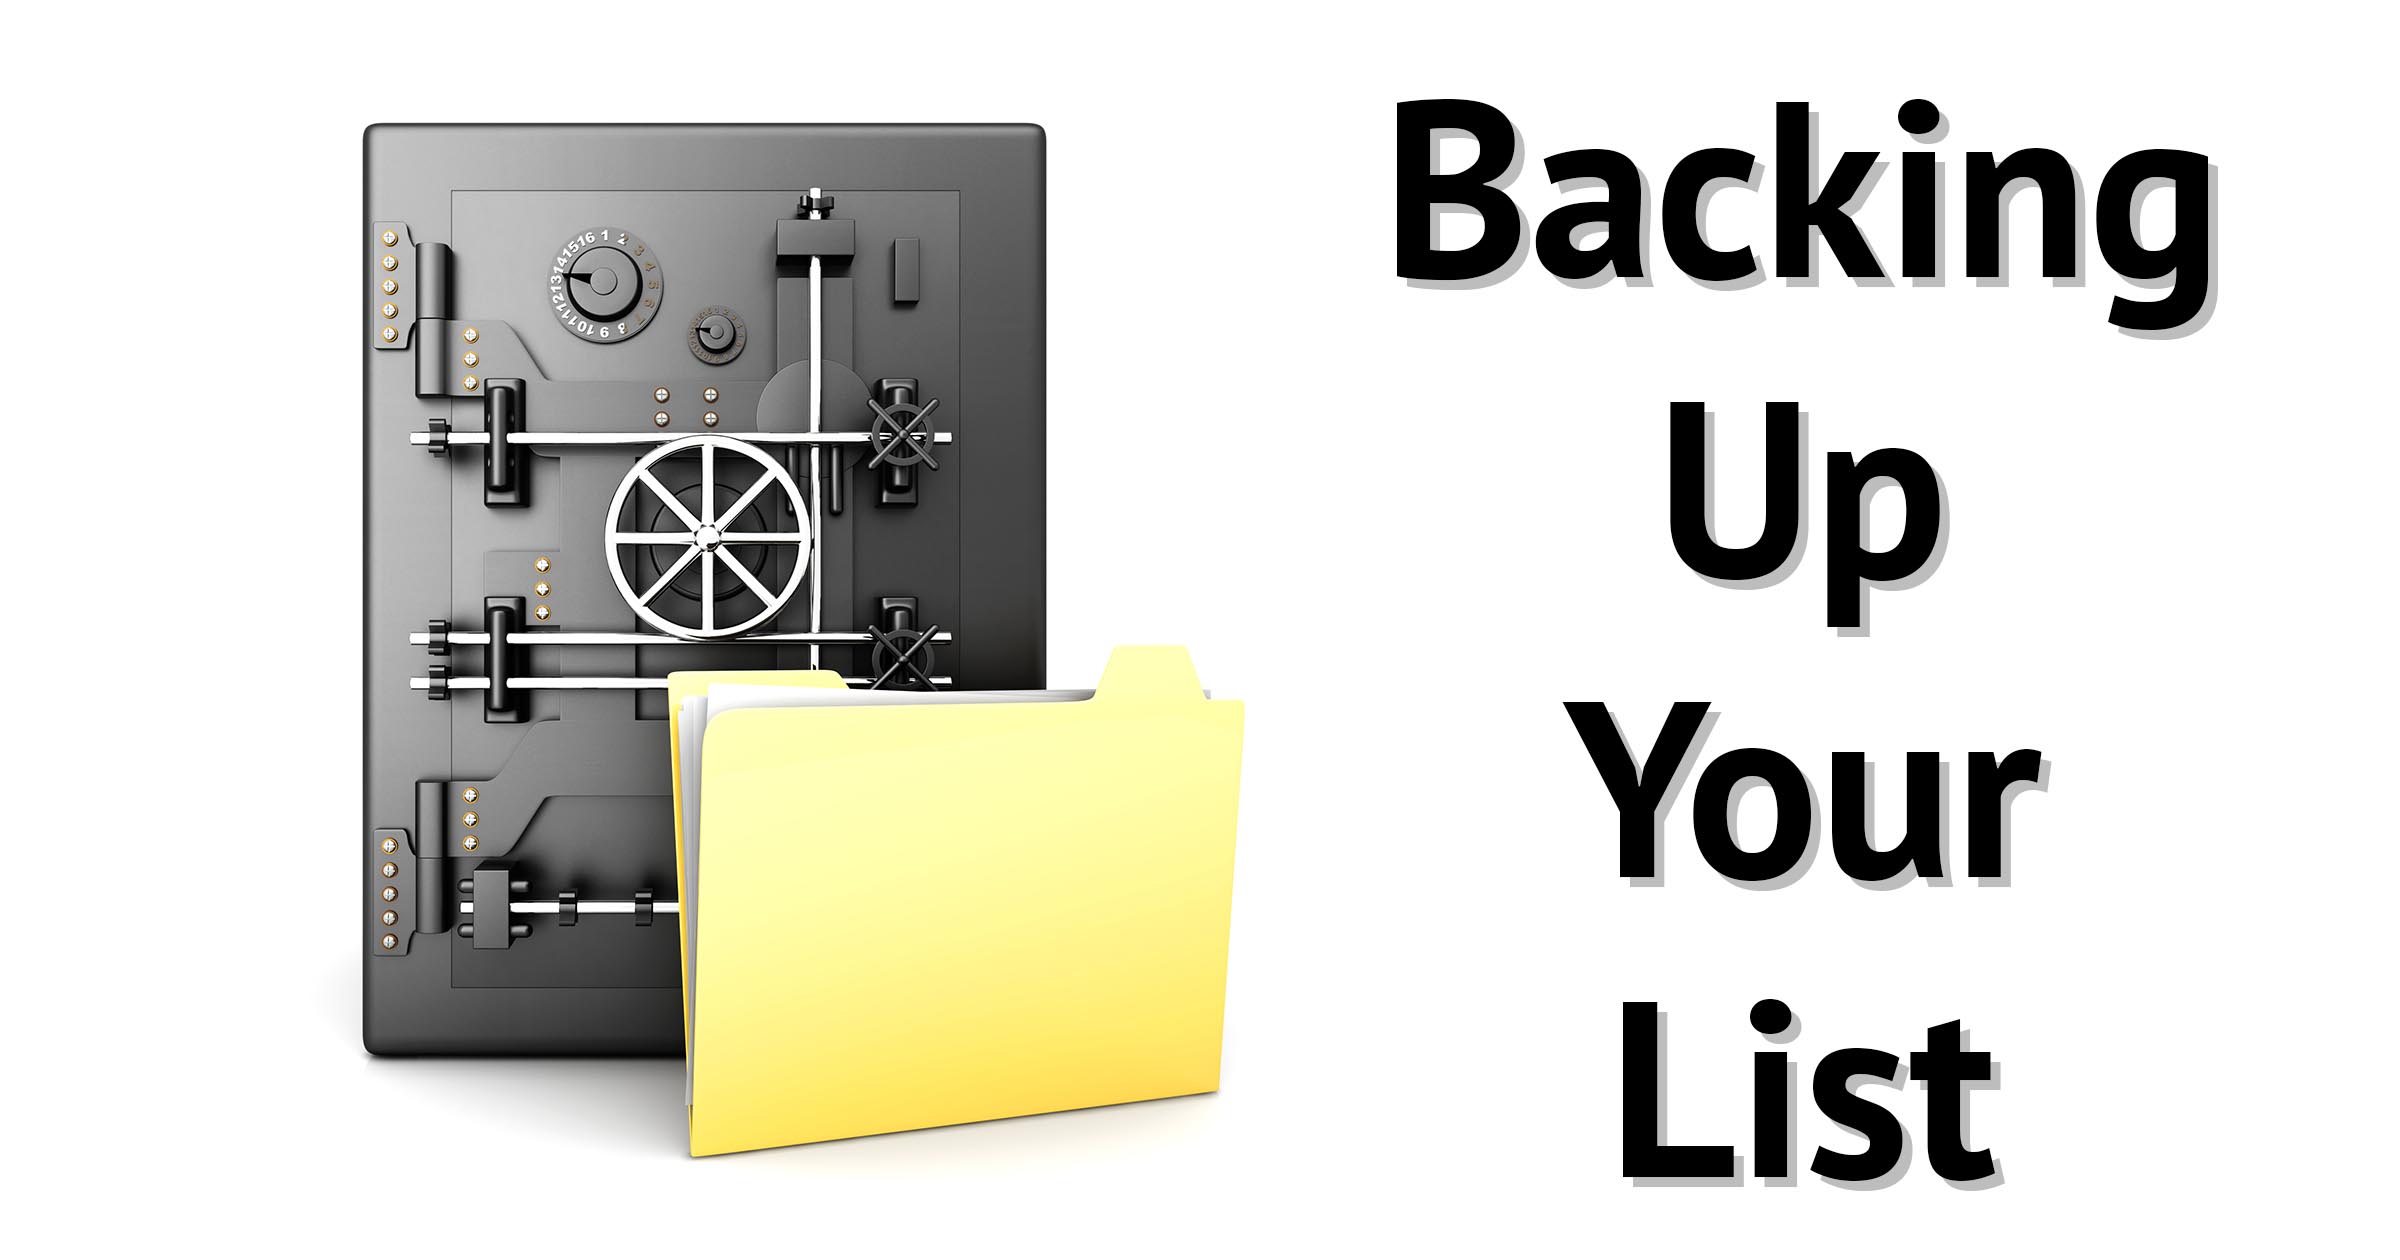 Backing Up Your List